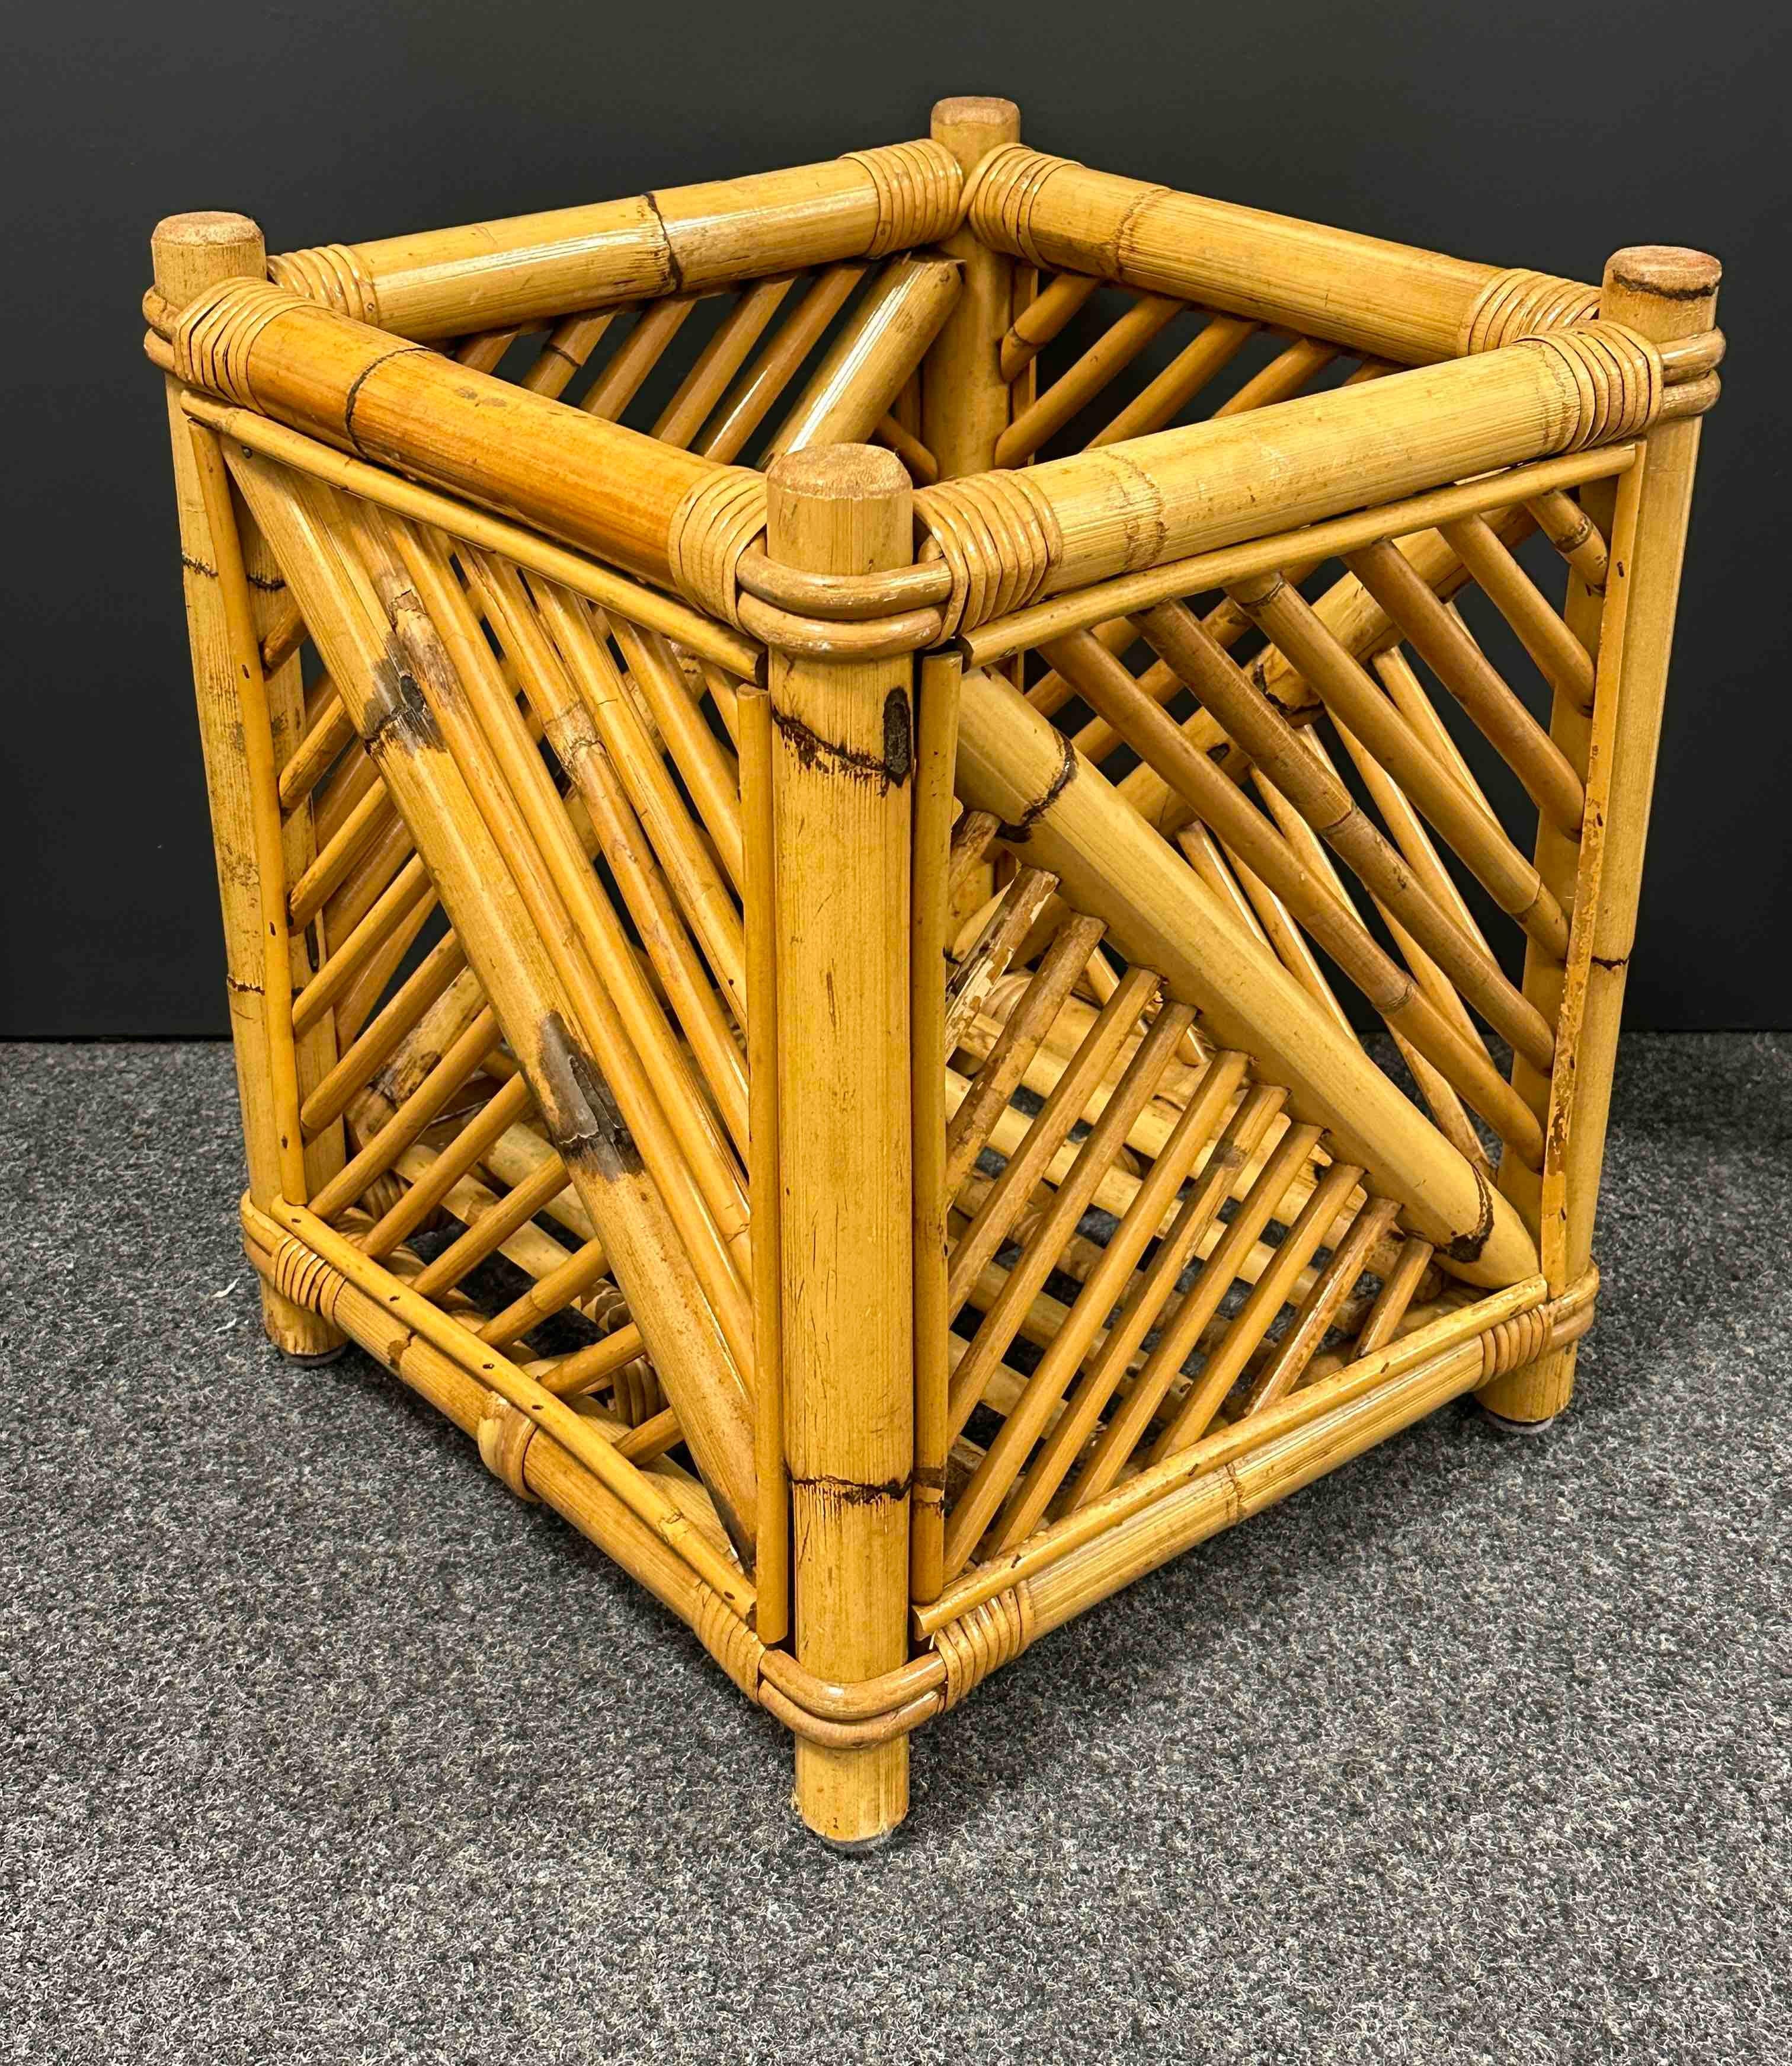 This beautiful vintage pot plant holder or hip basket was manufactured by Vivai Del Sud, an Italian company. It is made of bamboo weave and features a unique and stylish design. The basket has a square shape. It is in excellent vintage condition and